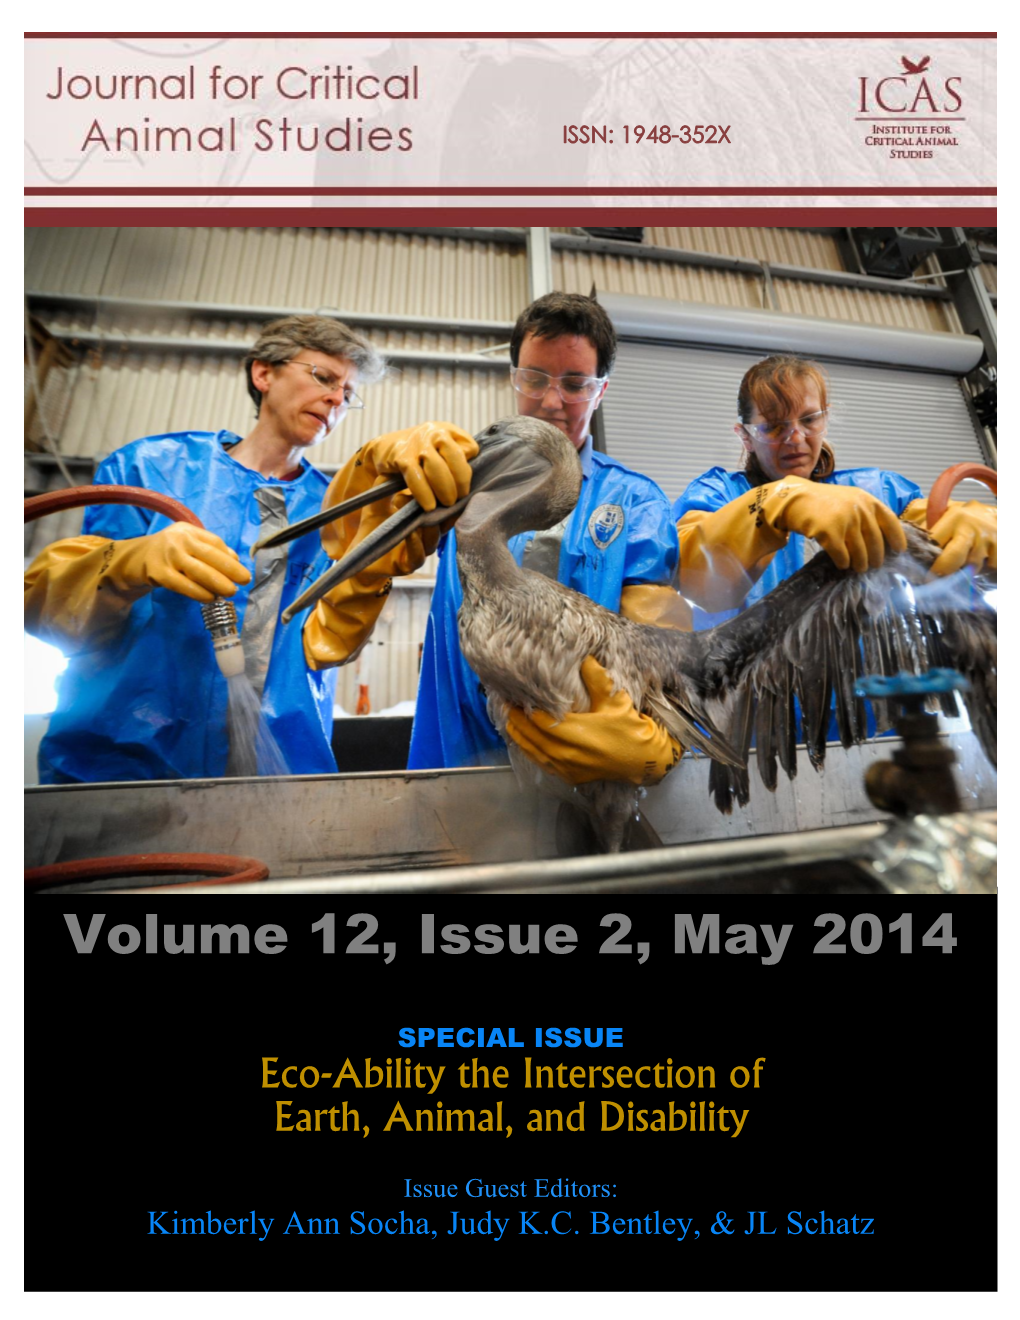 JCAS Volume 12, Issue 2, May 2014